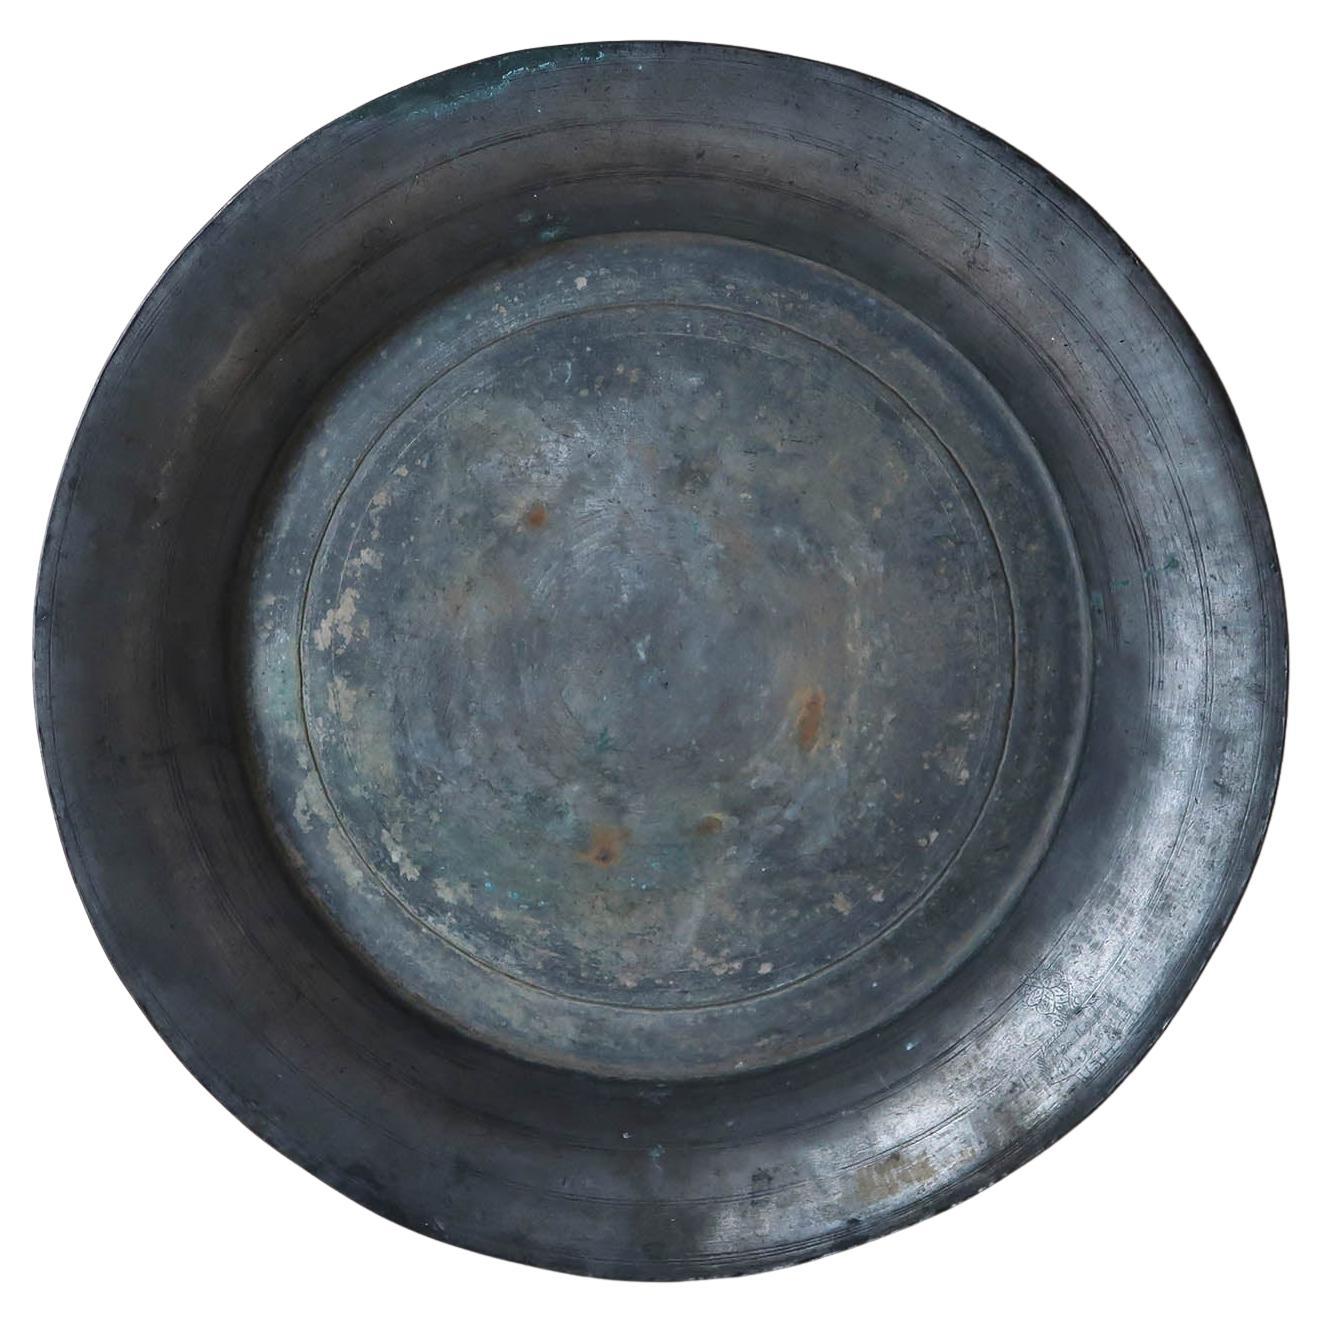 Monumental Antique Pewter Dish With Ownership Inscription For Sale